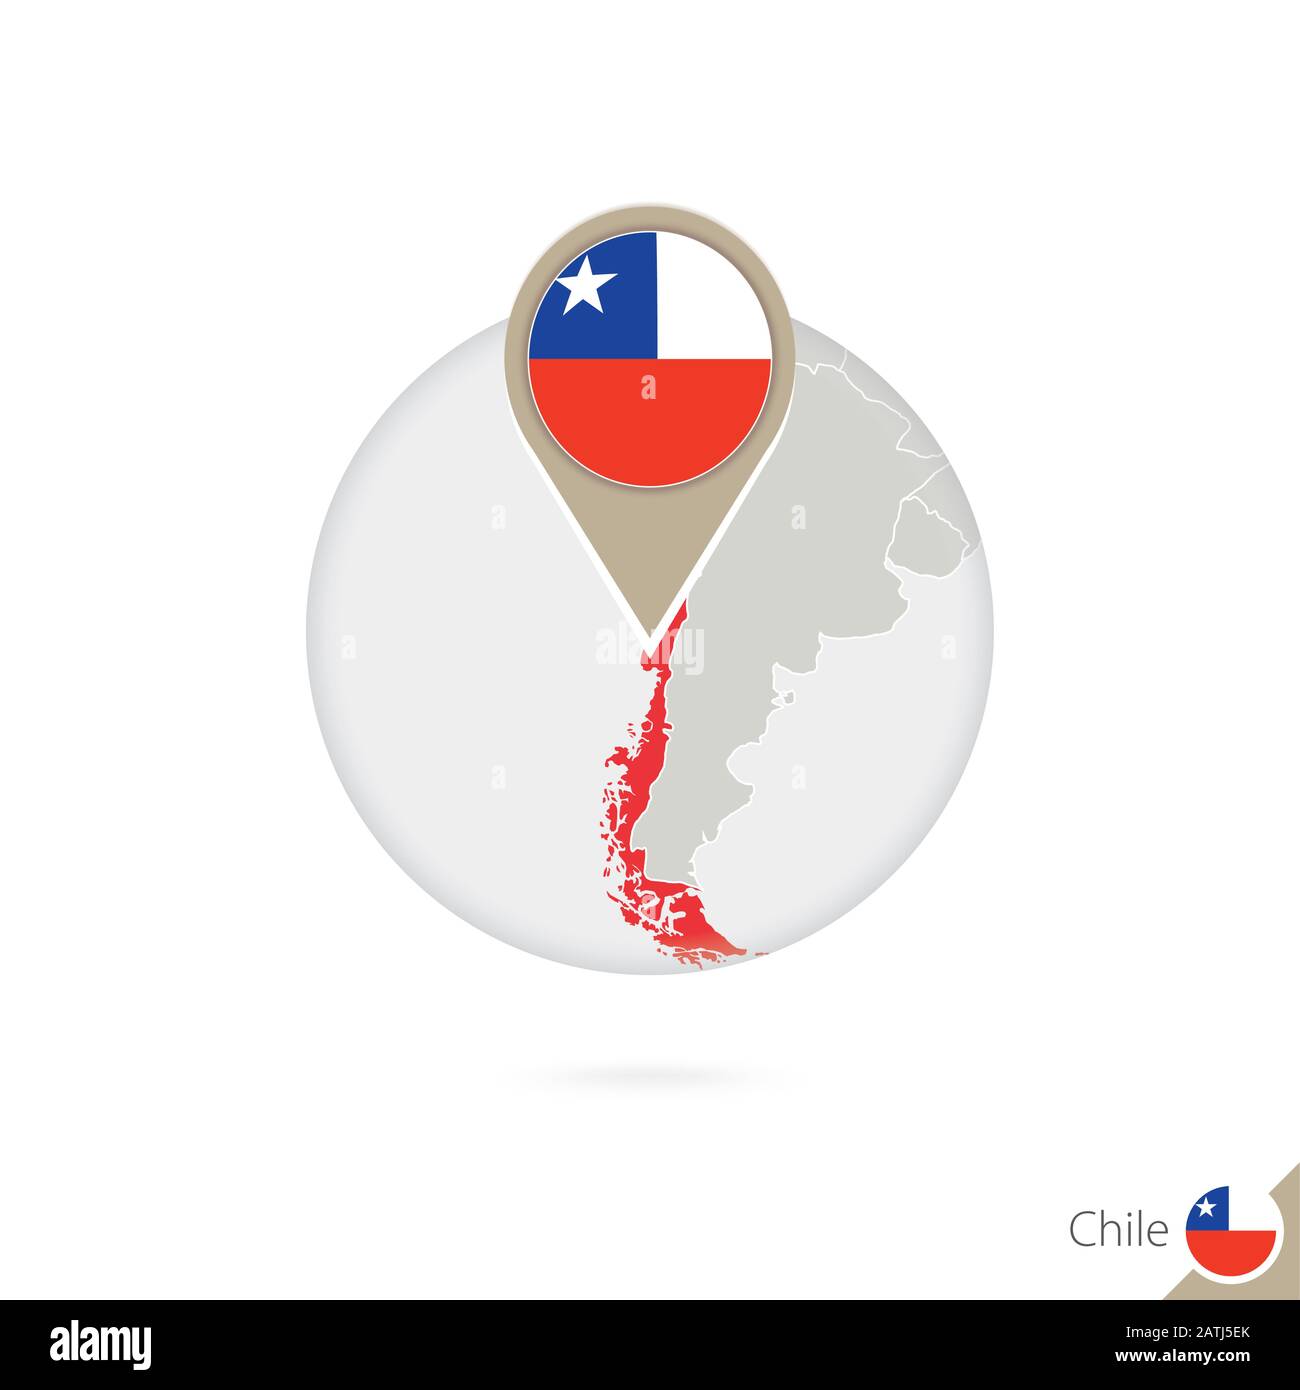 Chile map and flag in circle. Map of Chile, Chile flag pin. Map of Chile in the style of the globe. Vector Illustration. Stock Vector